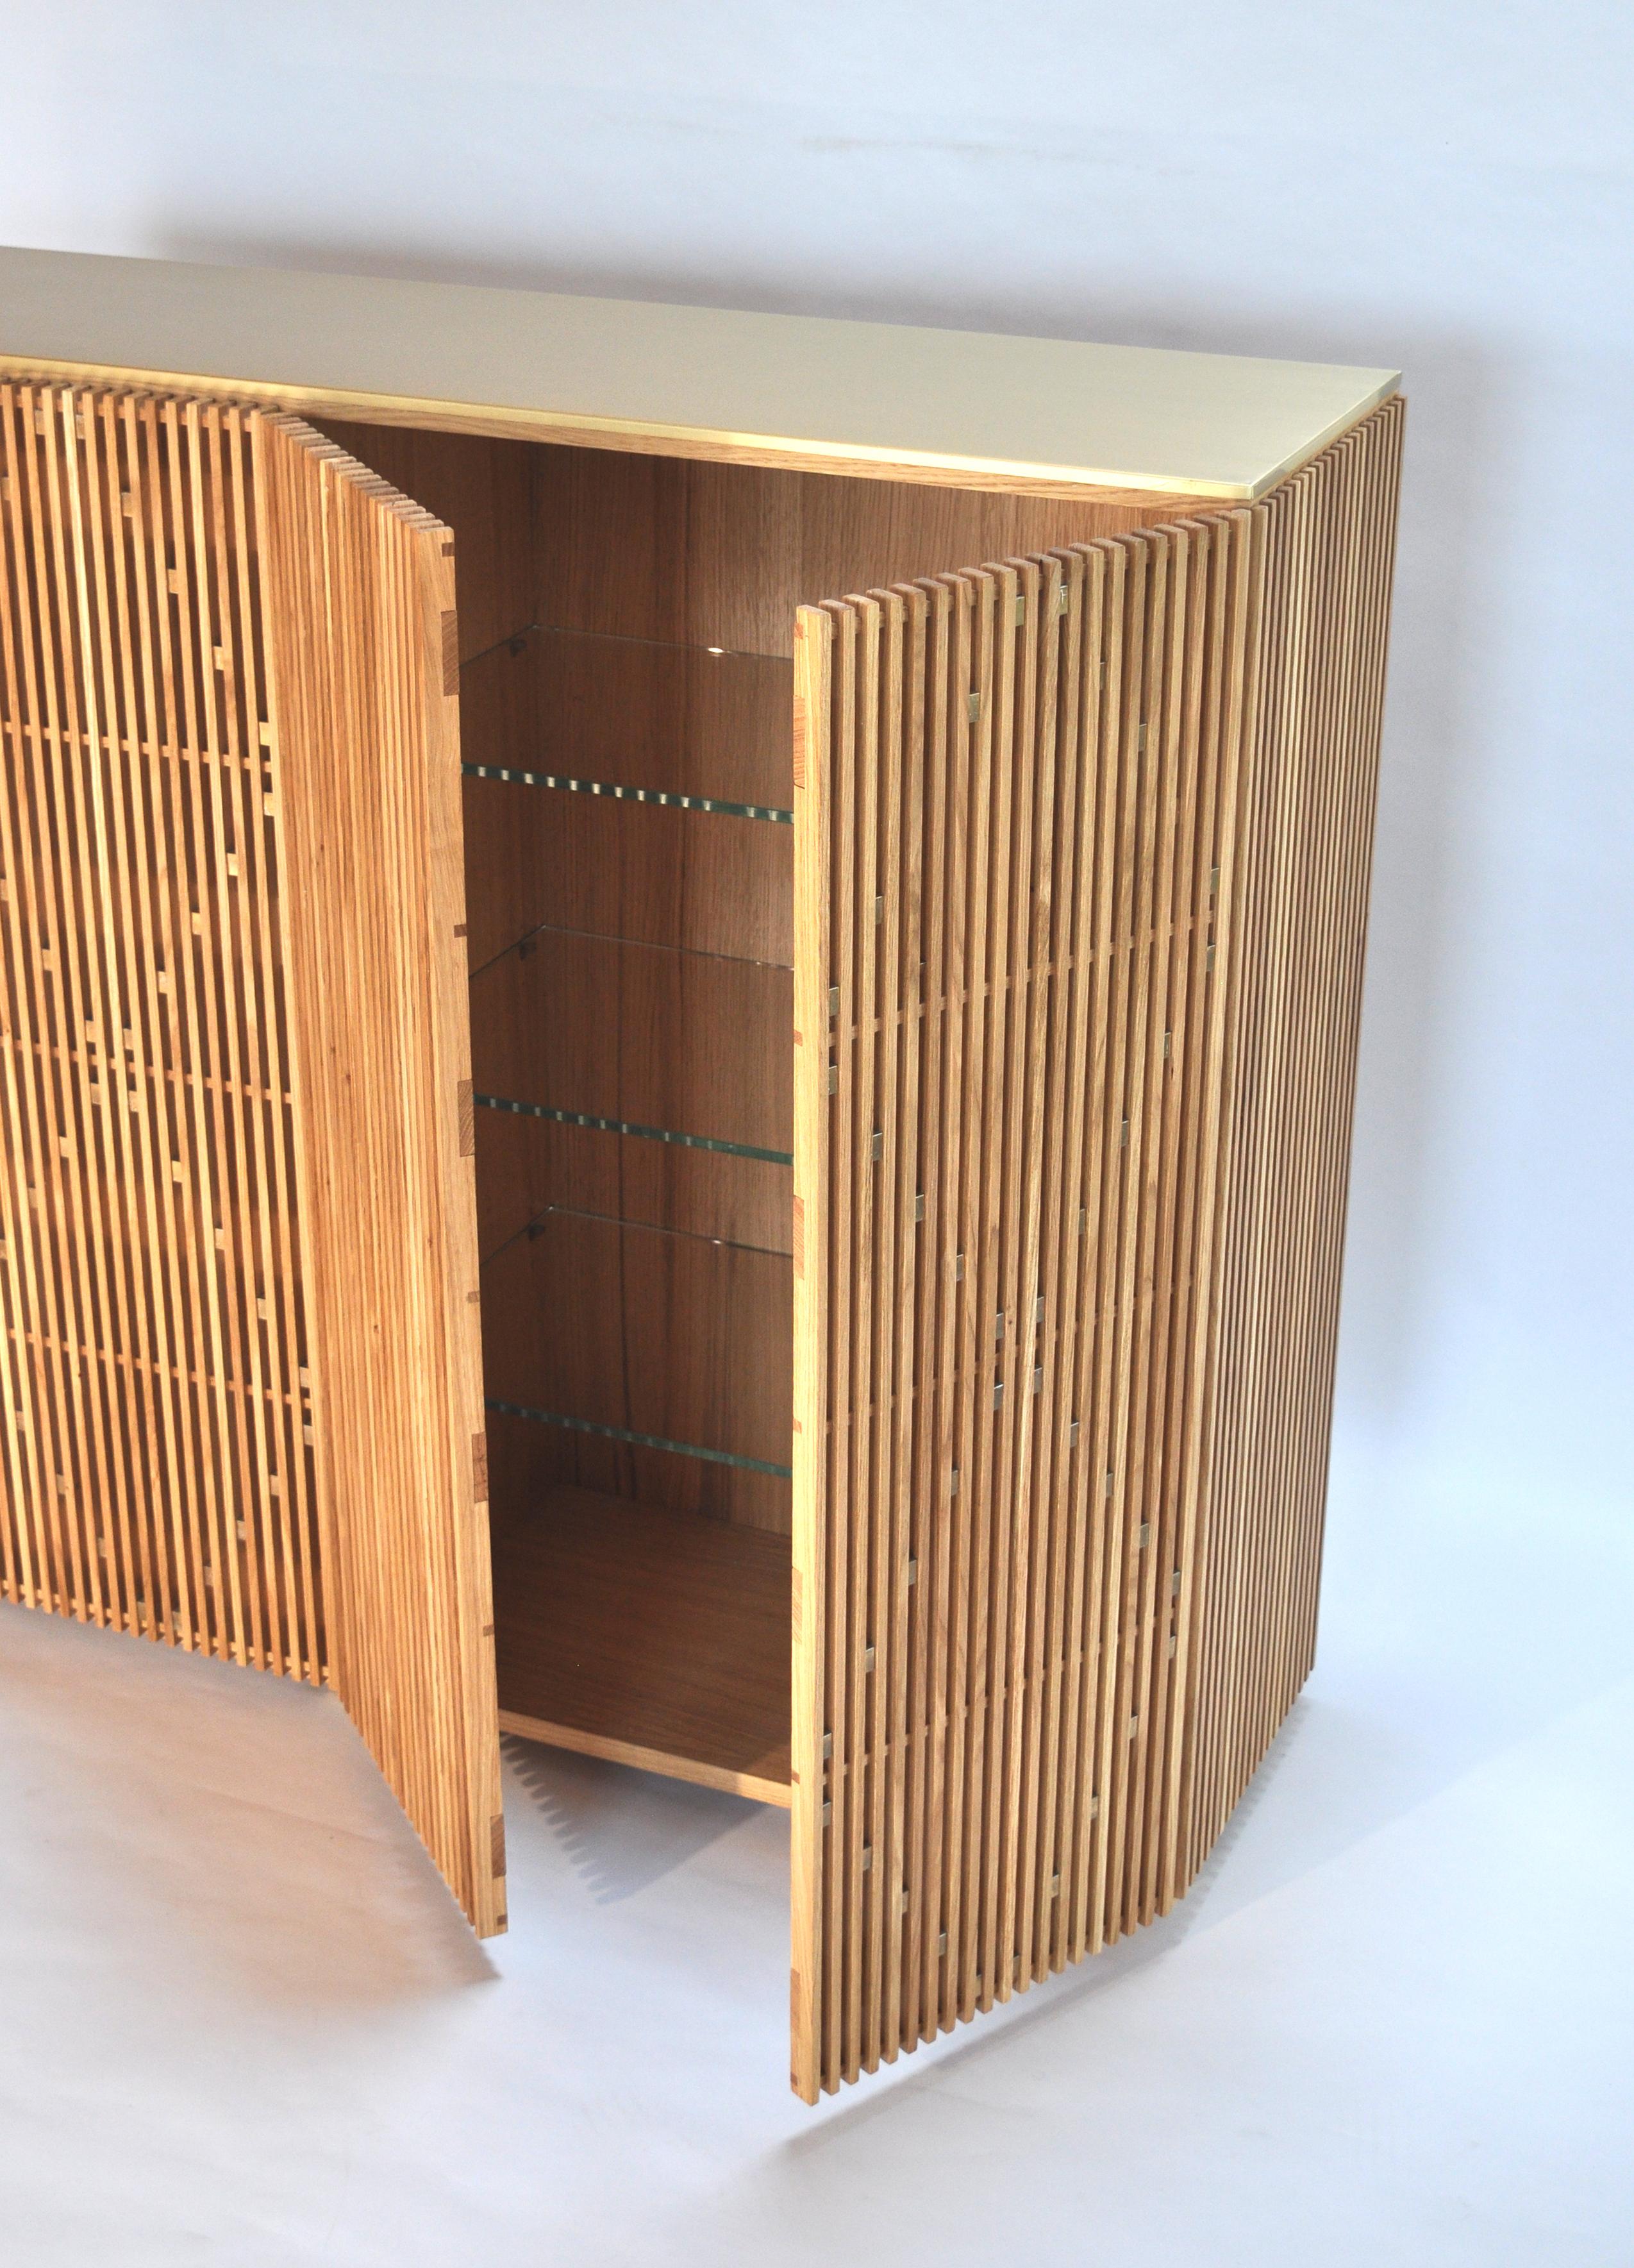 Contemporary Crafted Cabinet, Sideboards Living Room Furniture Oak and Brass In New Condition For Sale In Meolo, Venezia